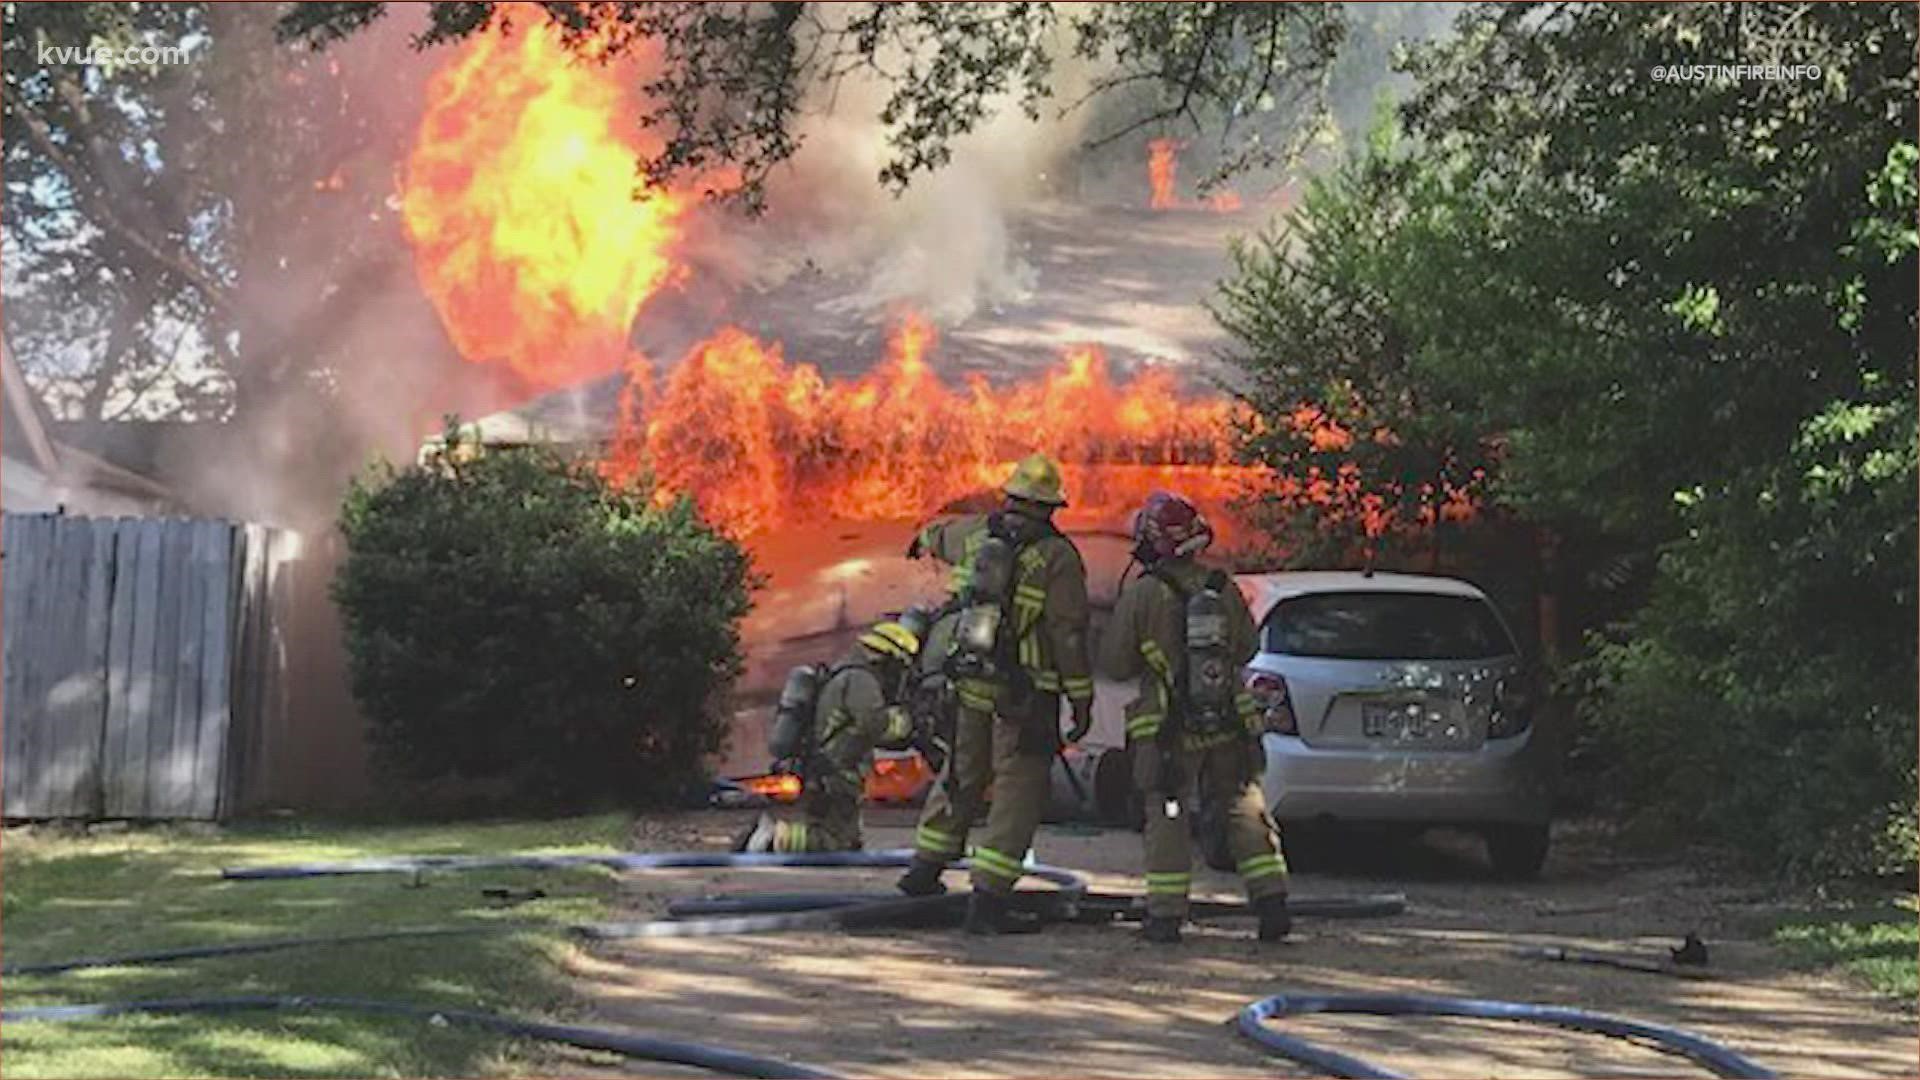 Firefighters say a motorcycle is to blame for a fire that burned a house in North Austin Saturday evening.